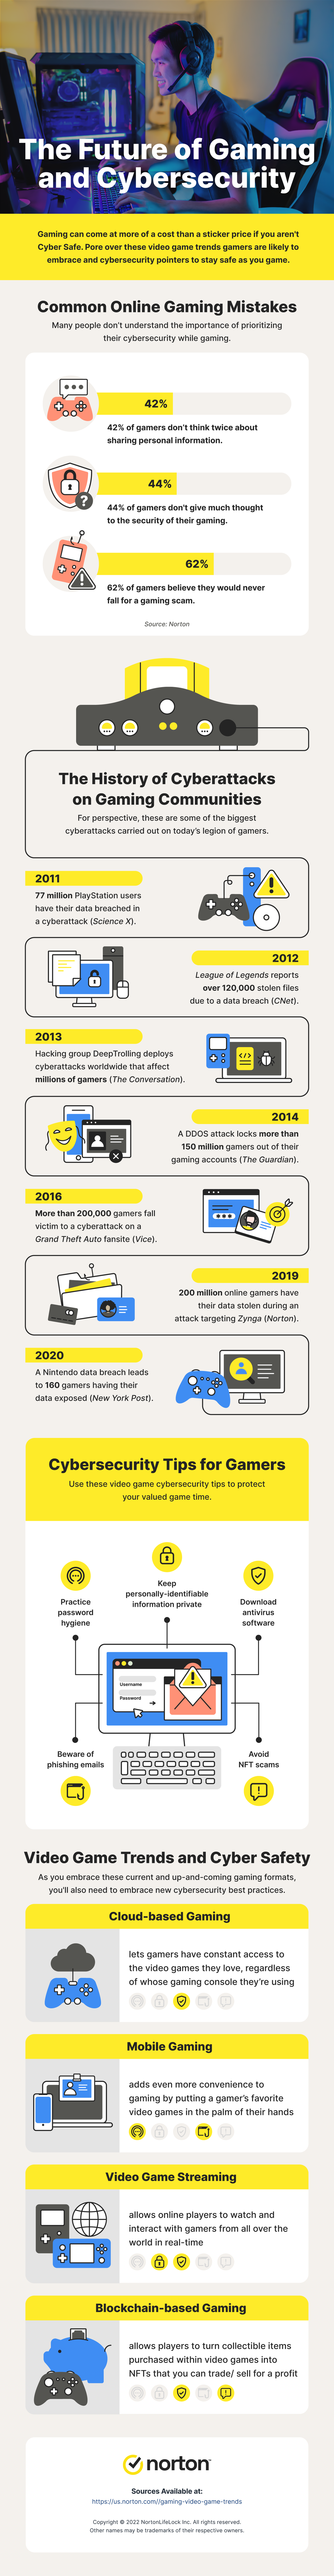 video game trends infographic